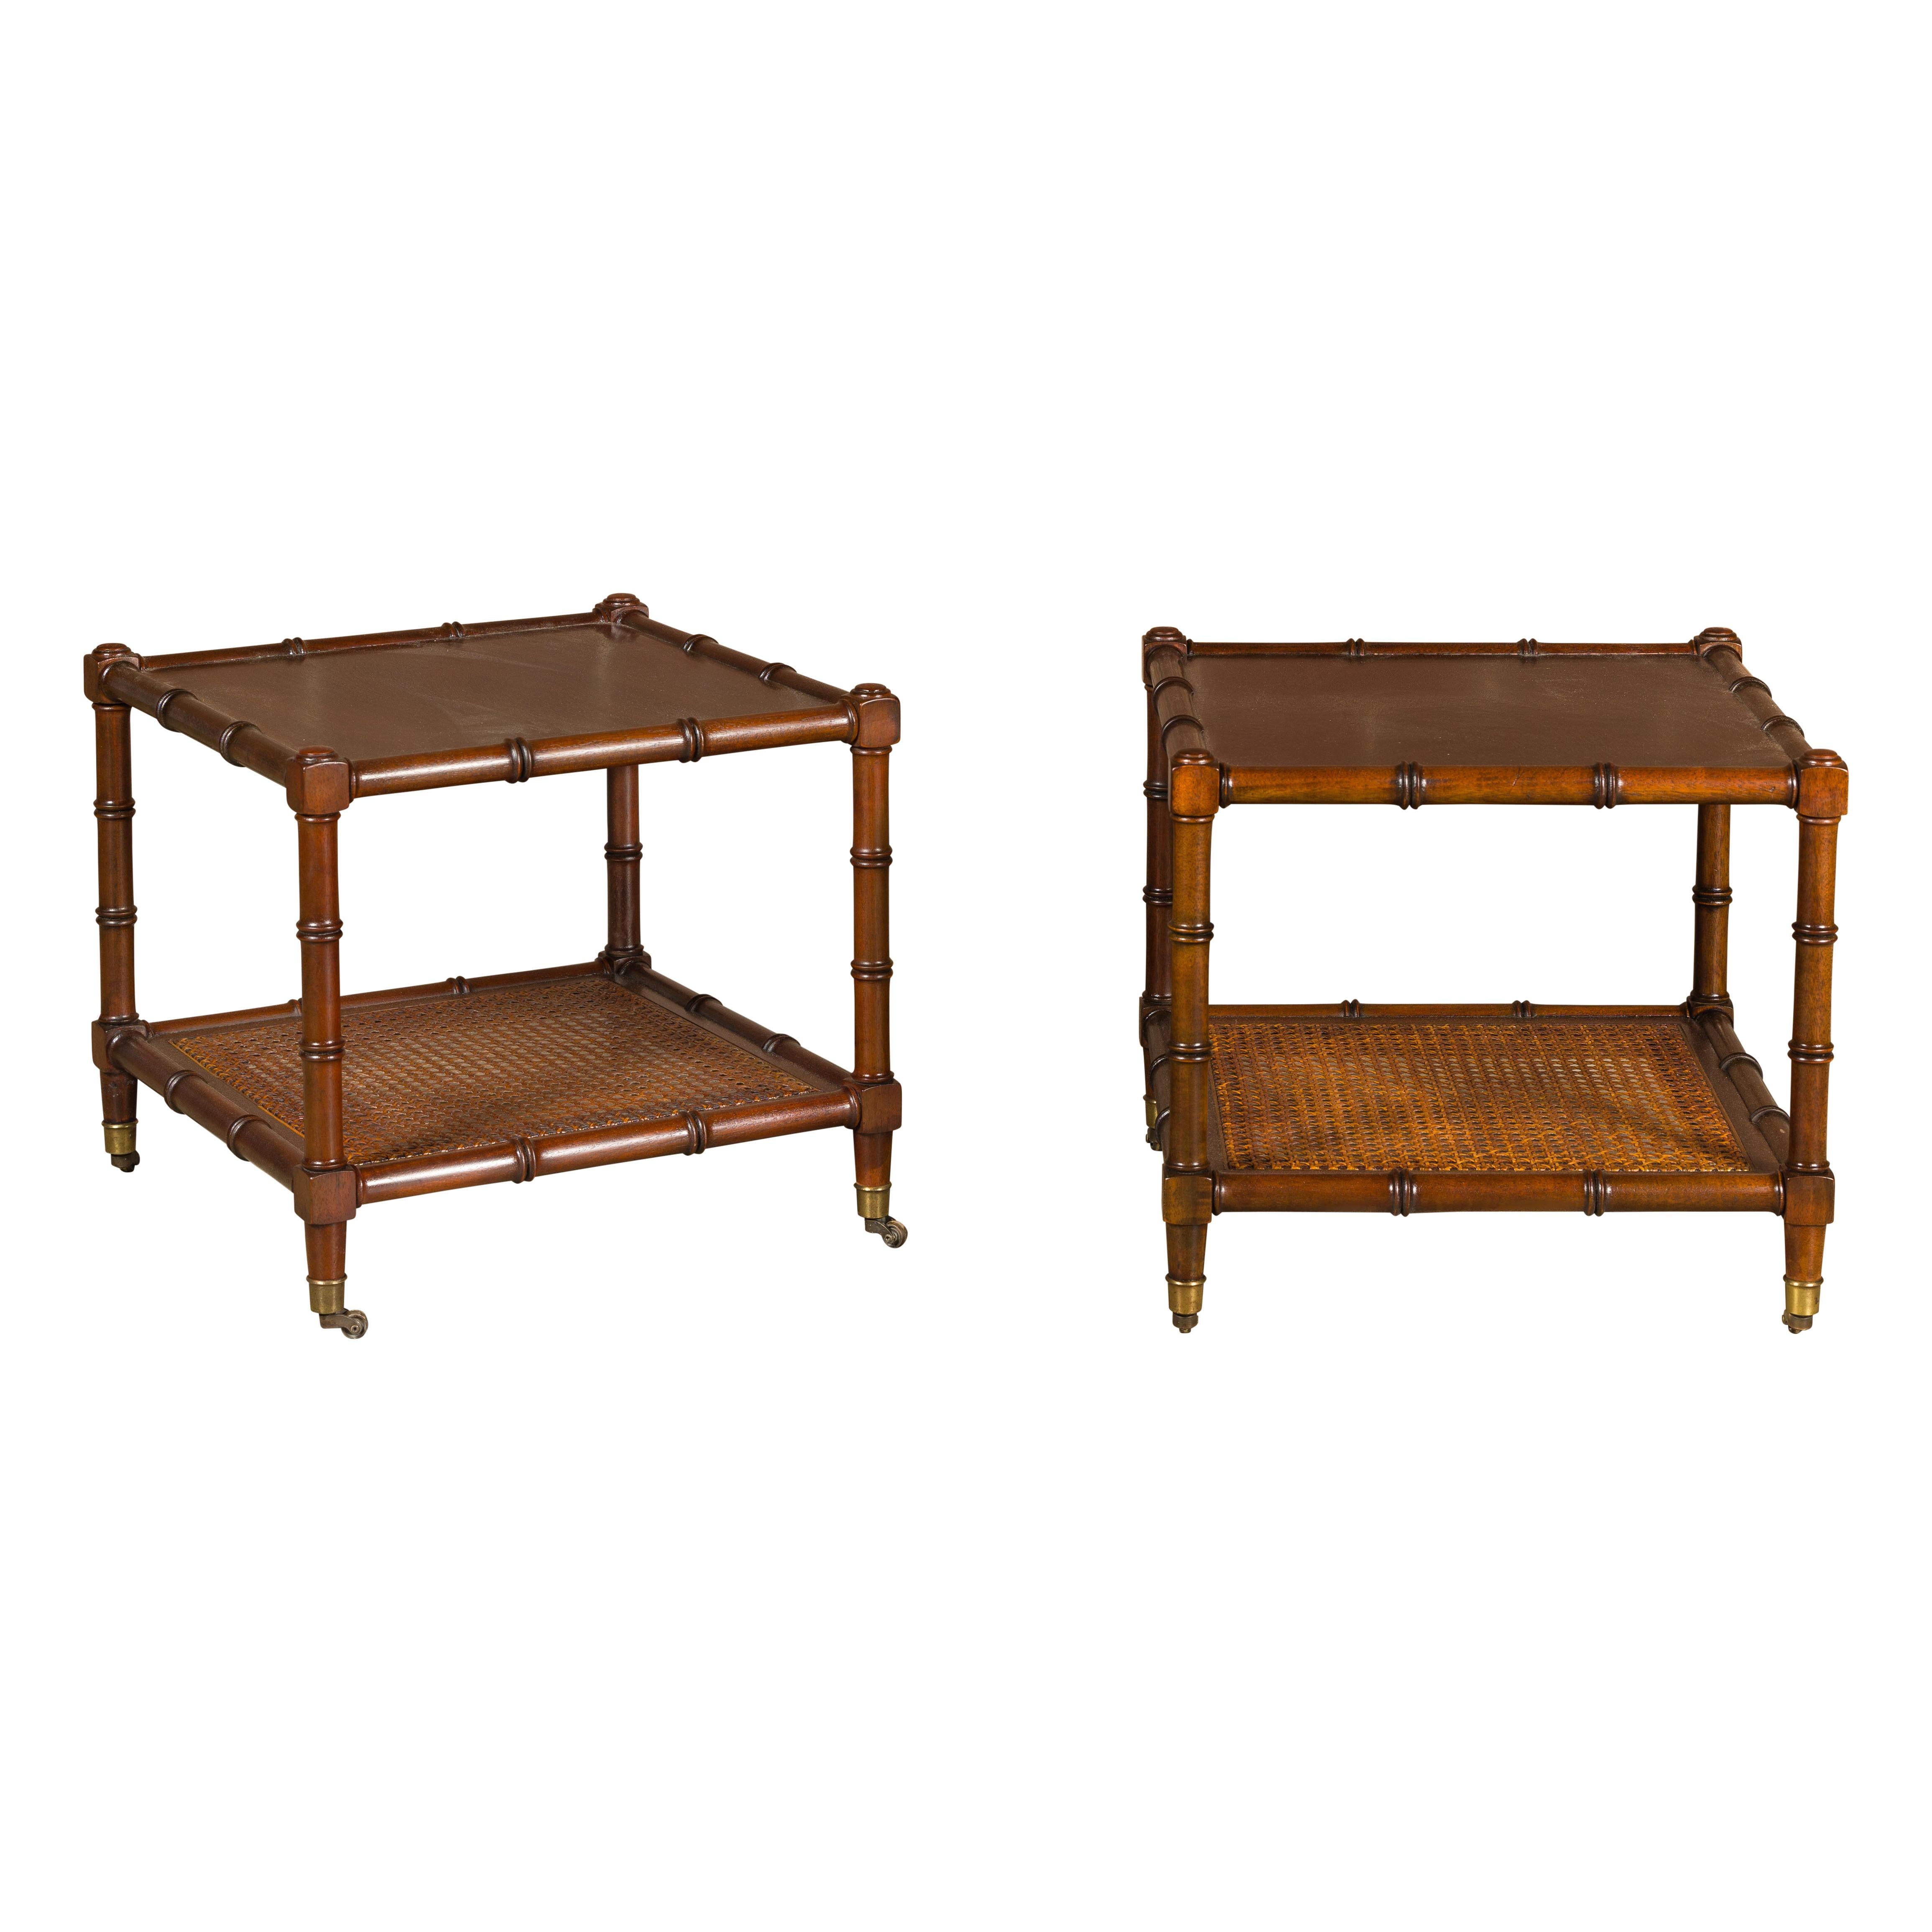 English Midcentury Walnut, Faux Bamboo and Cane Low Side Tables on Casters, Pair For Sale 9